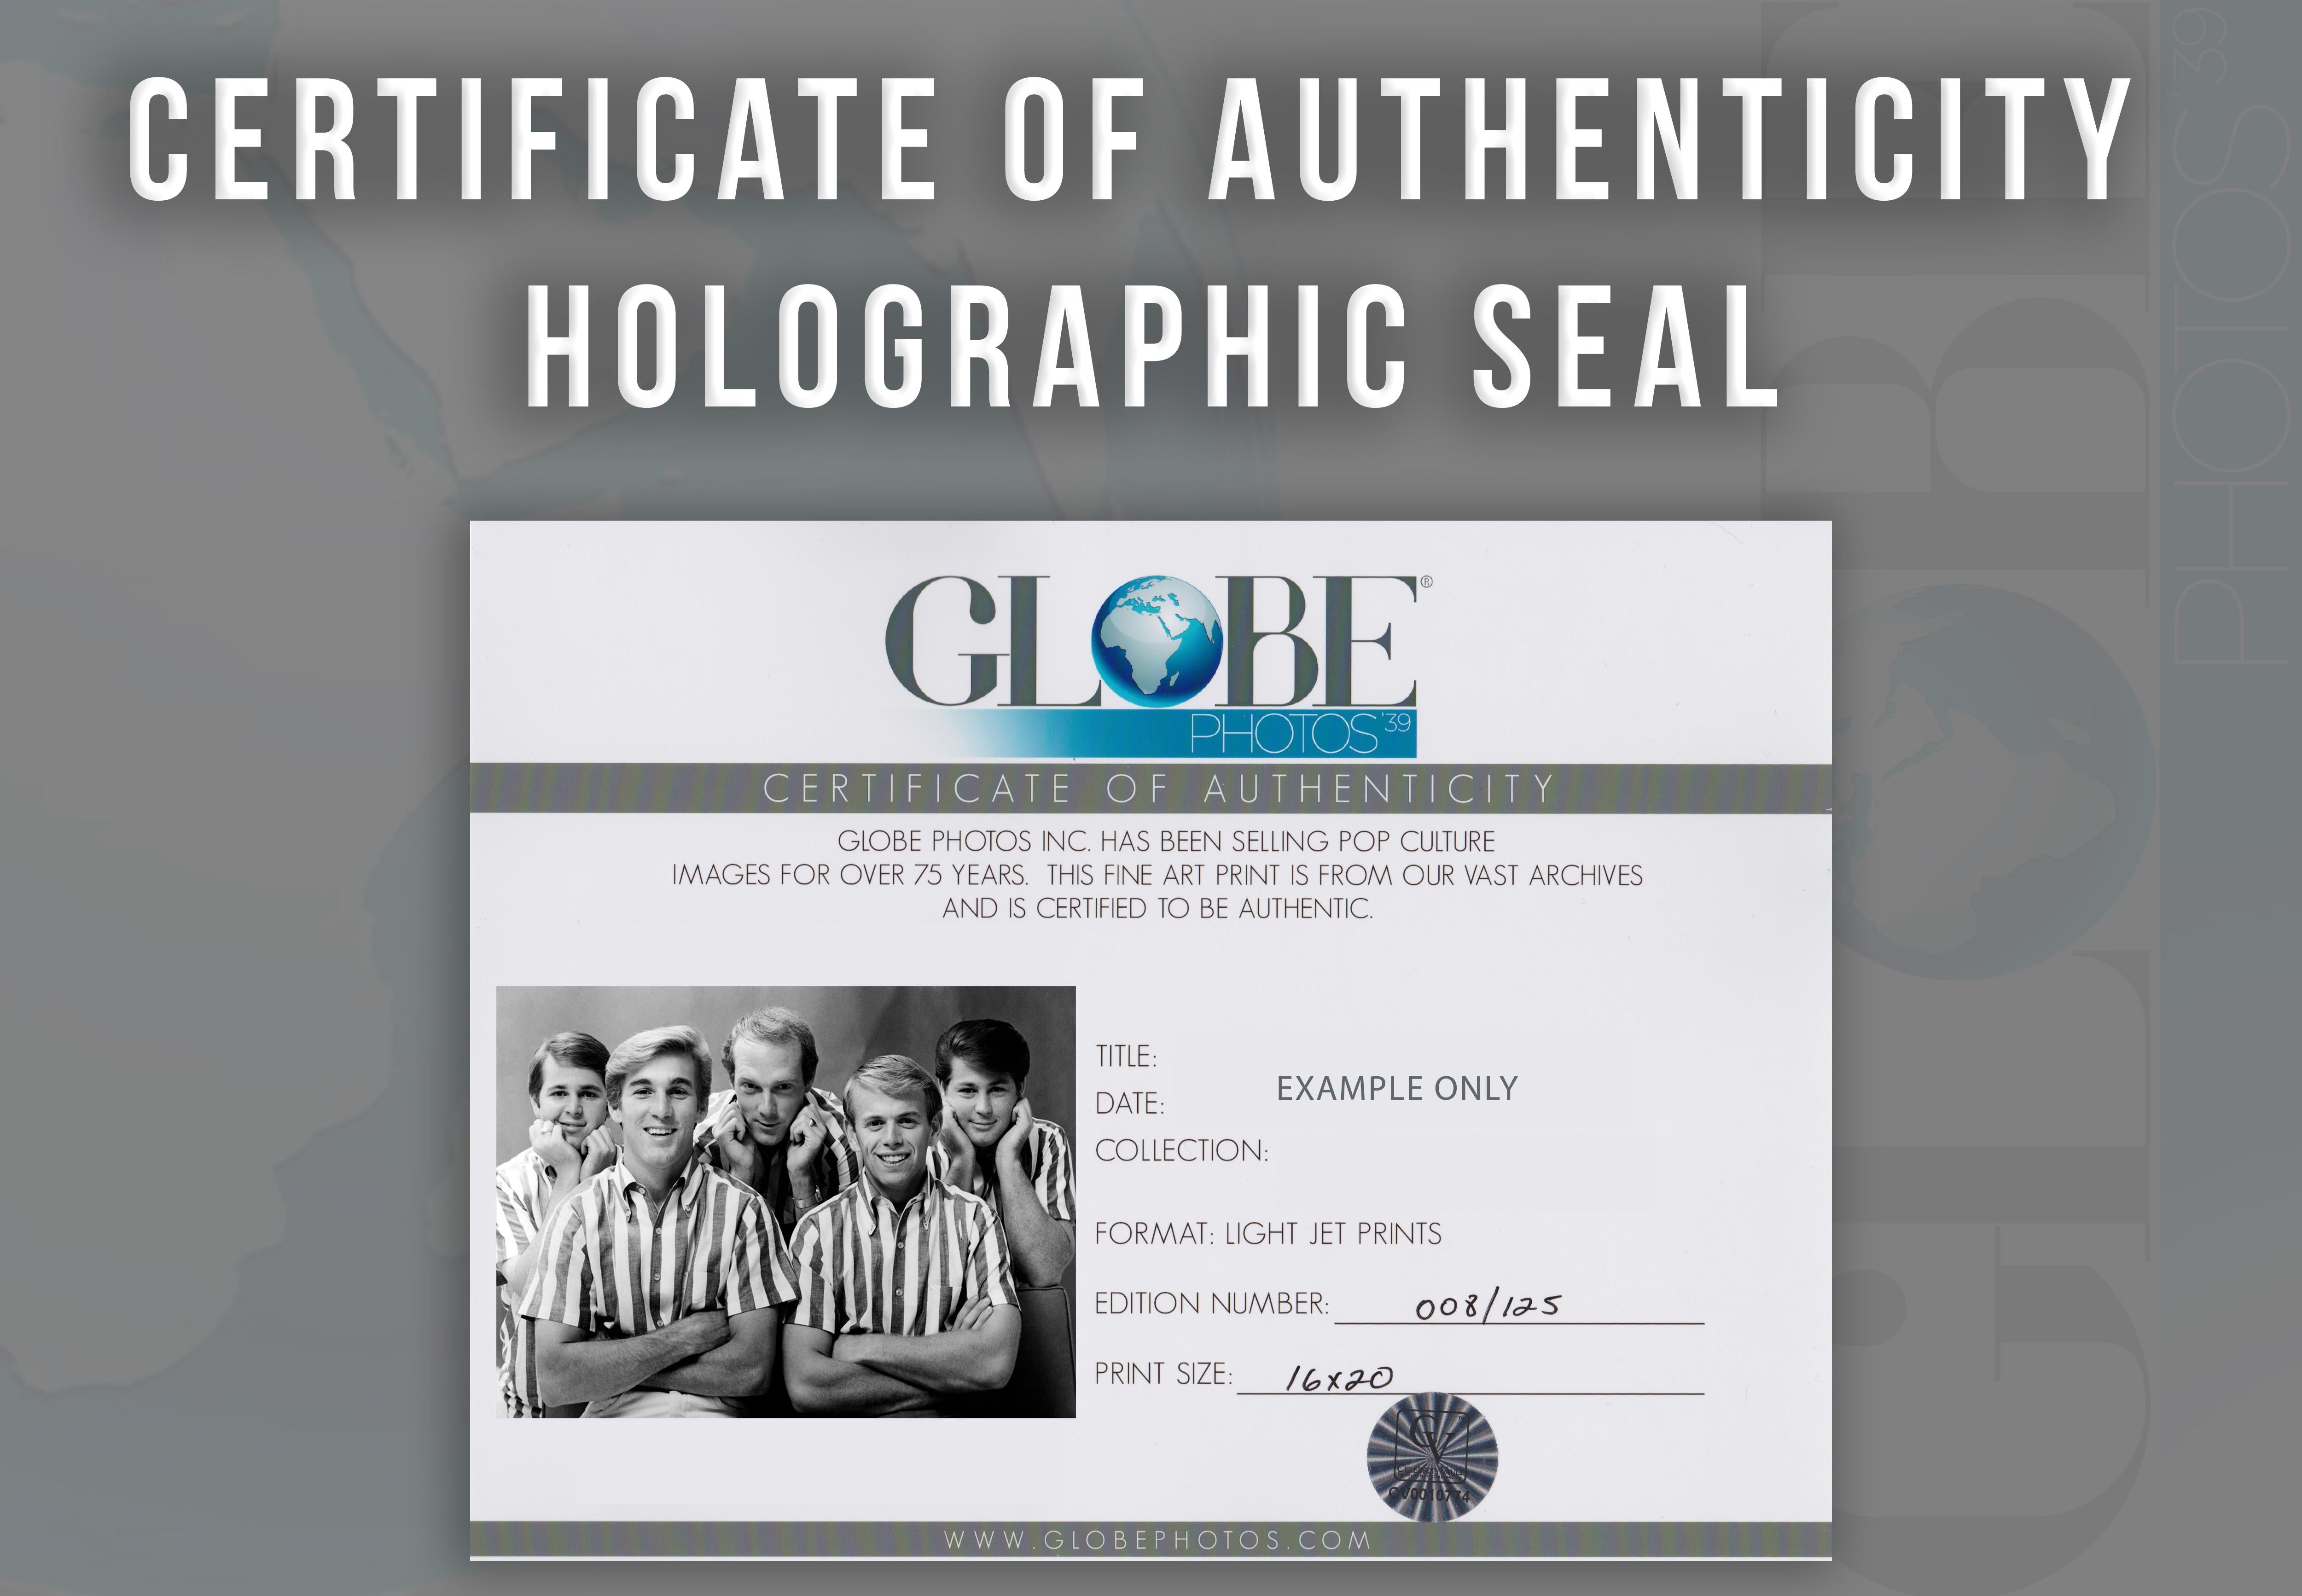 The Beach Boys in Stripes Globe Photos Fine Art Print - Gray Black and White Photograph by Unknown